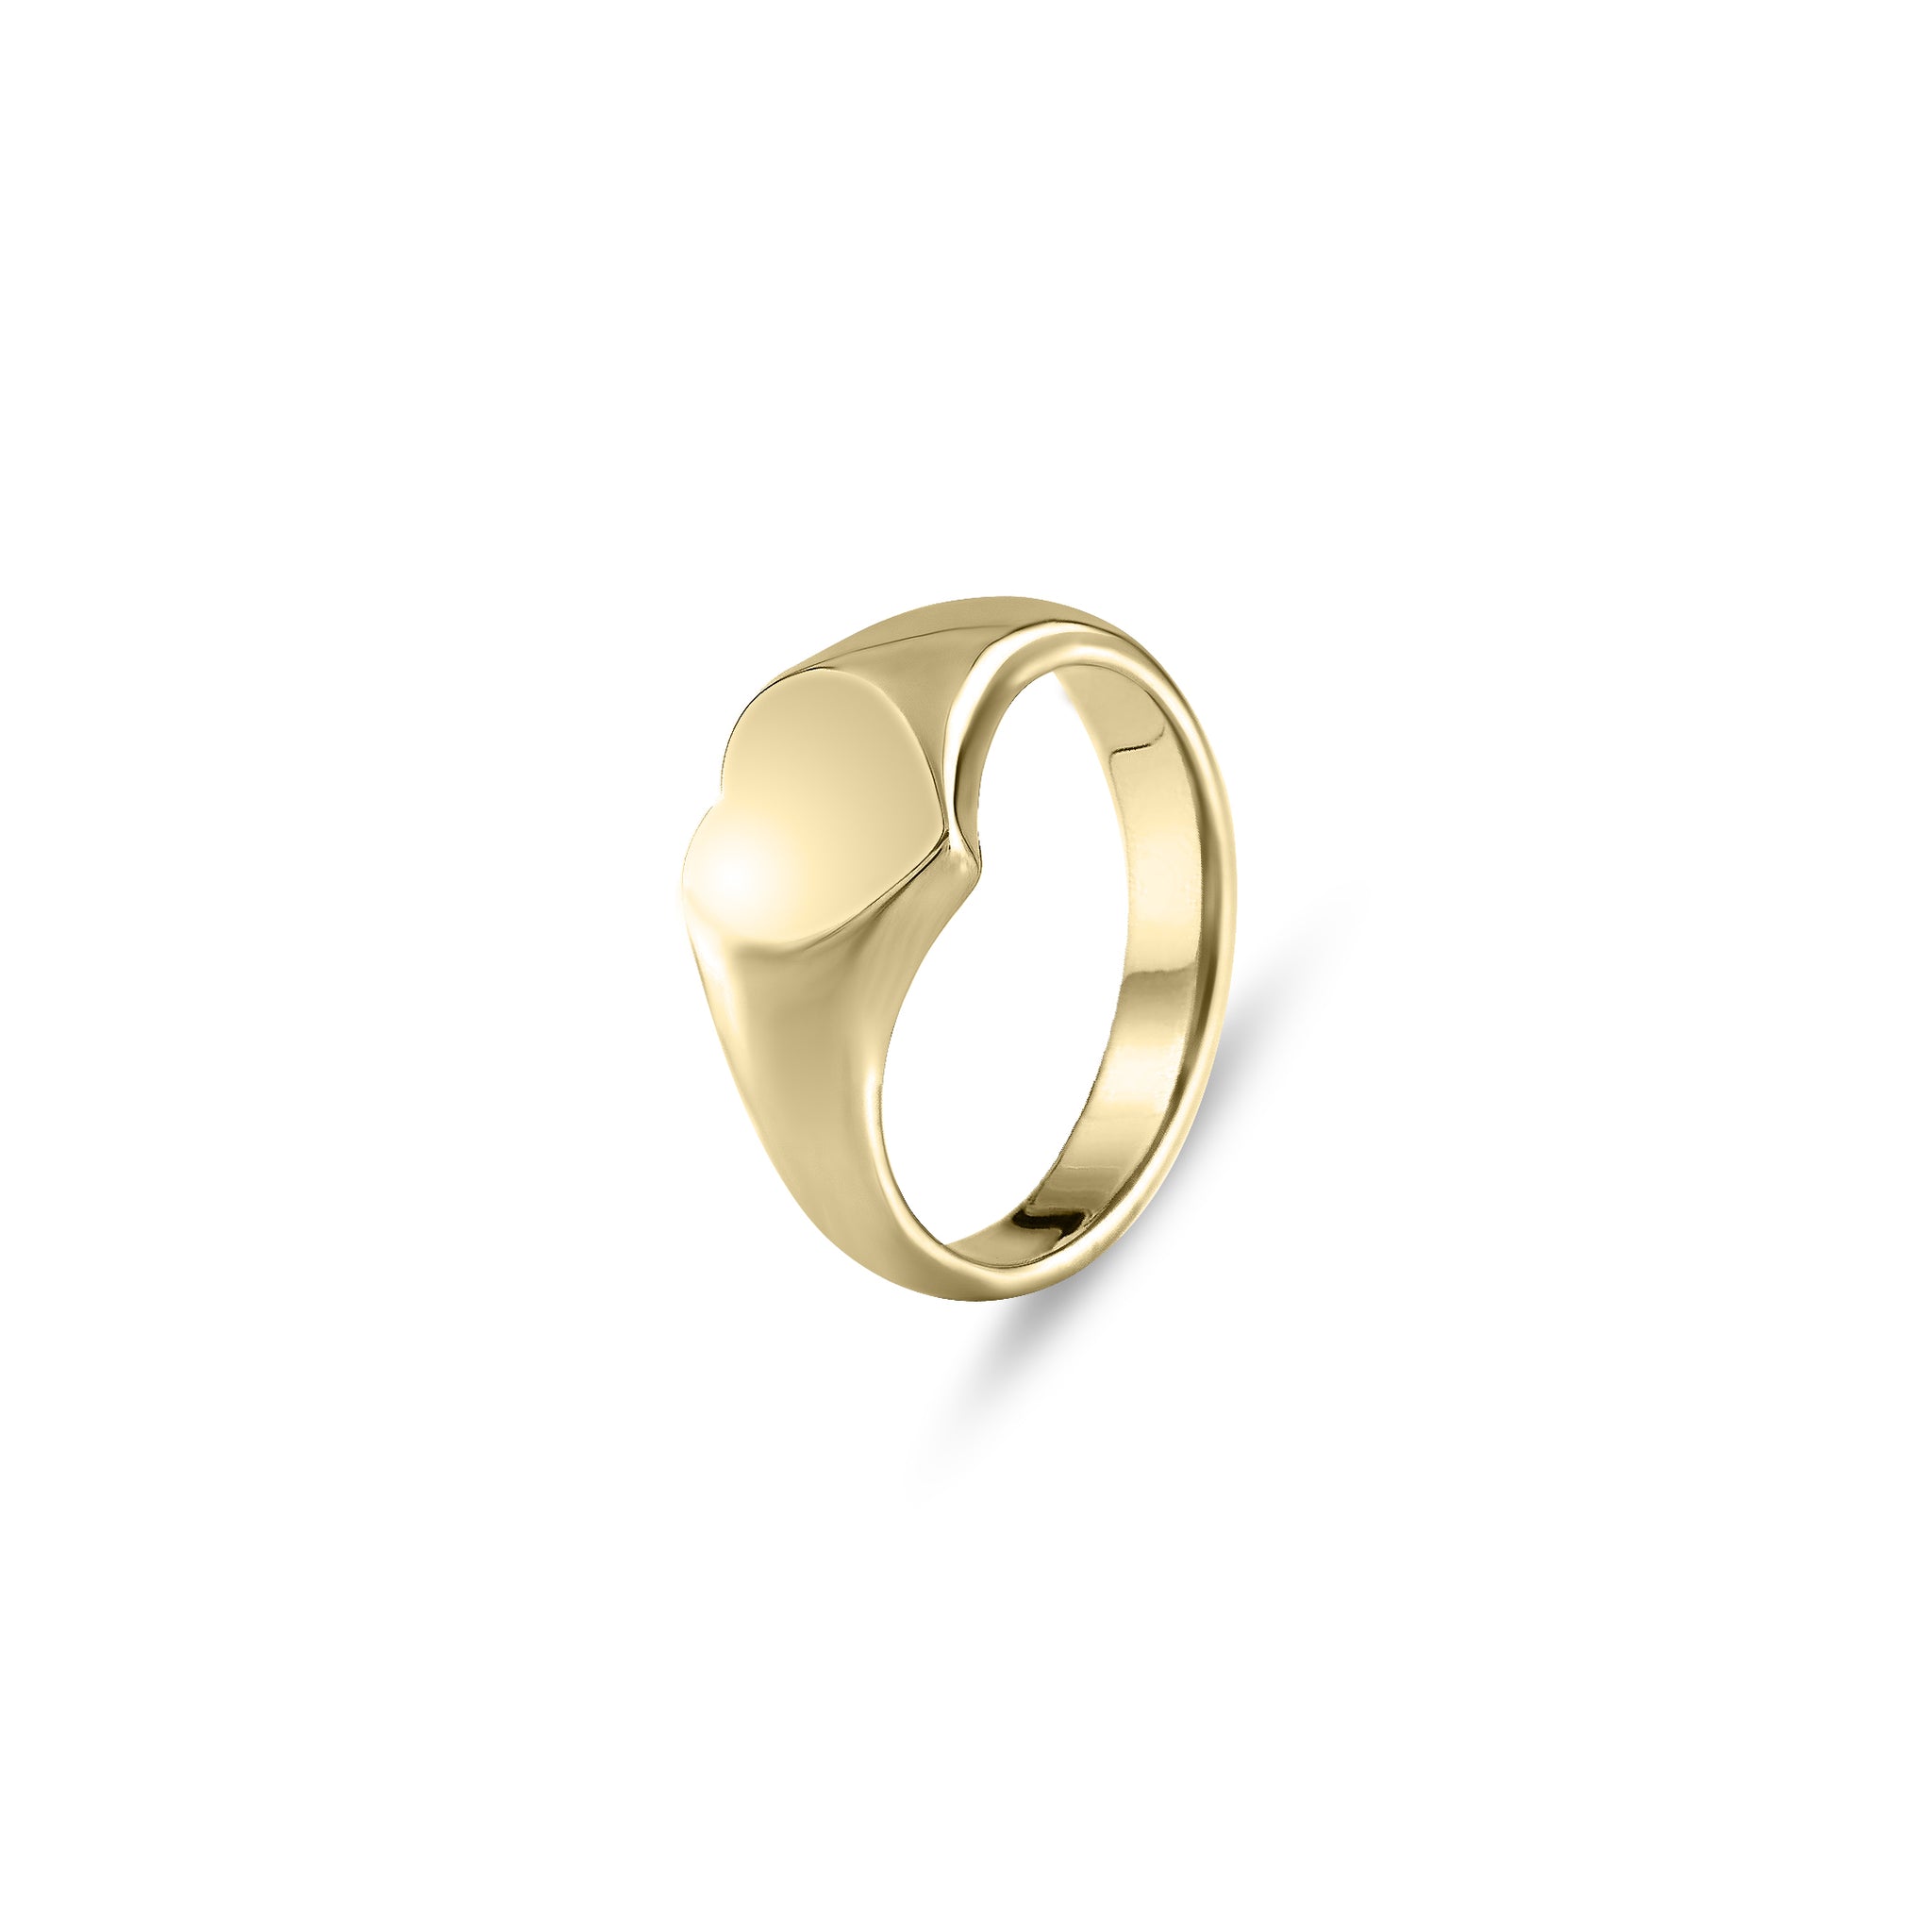 9ct Yellow Gold 9 x 9mm Heart Signet Ring